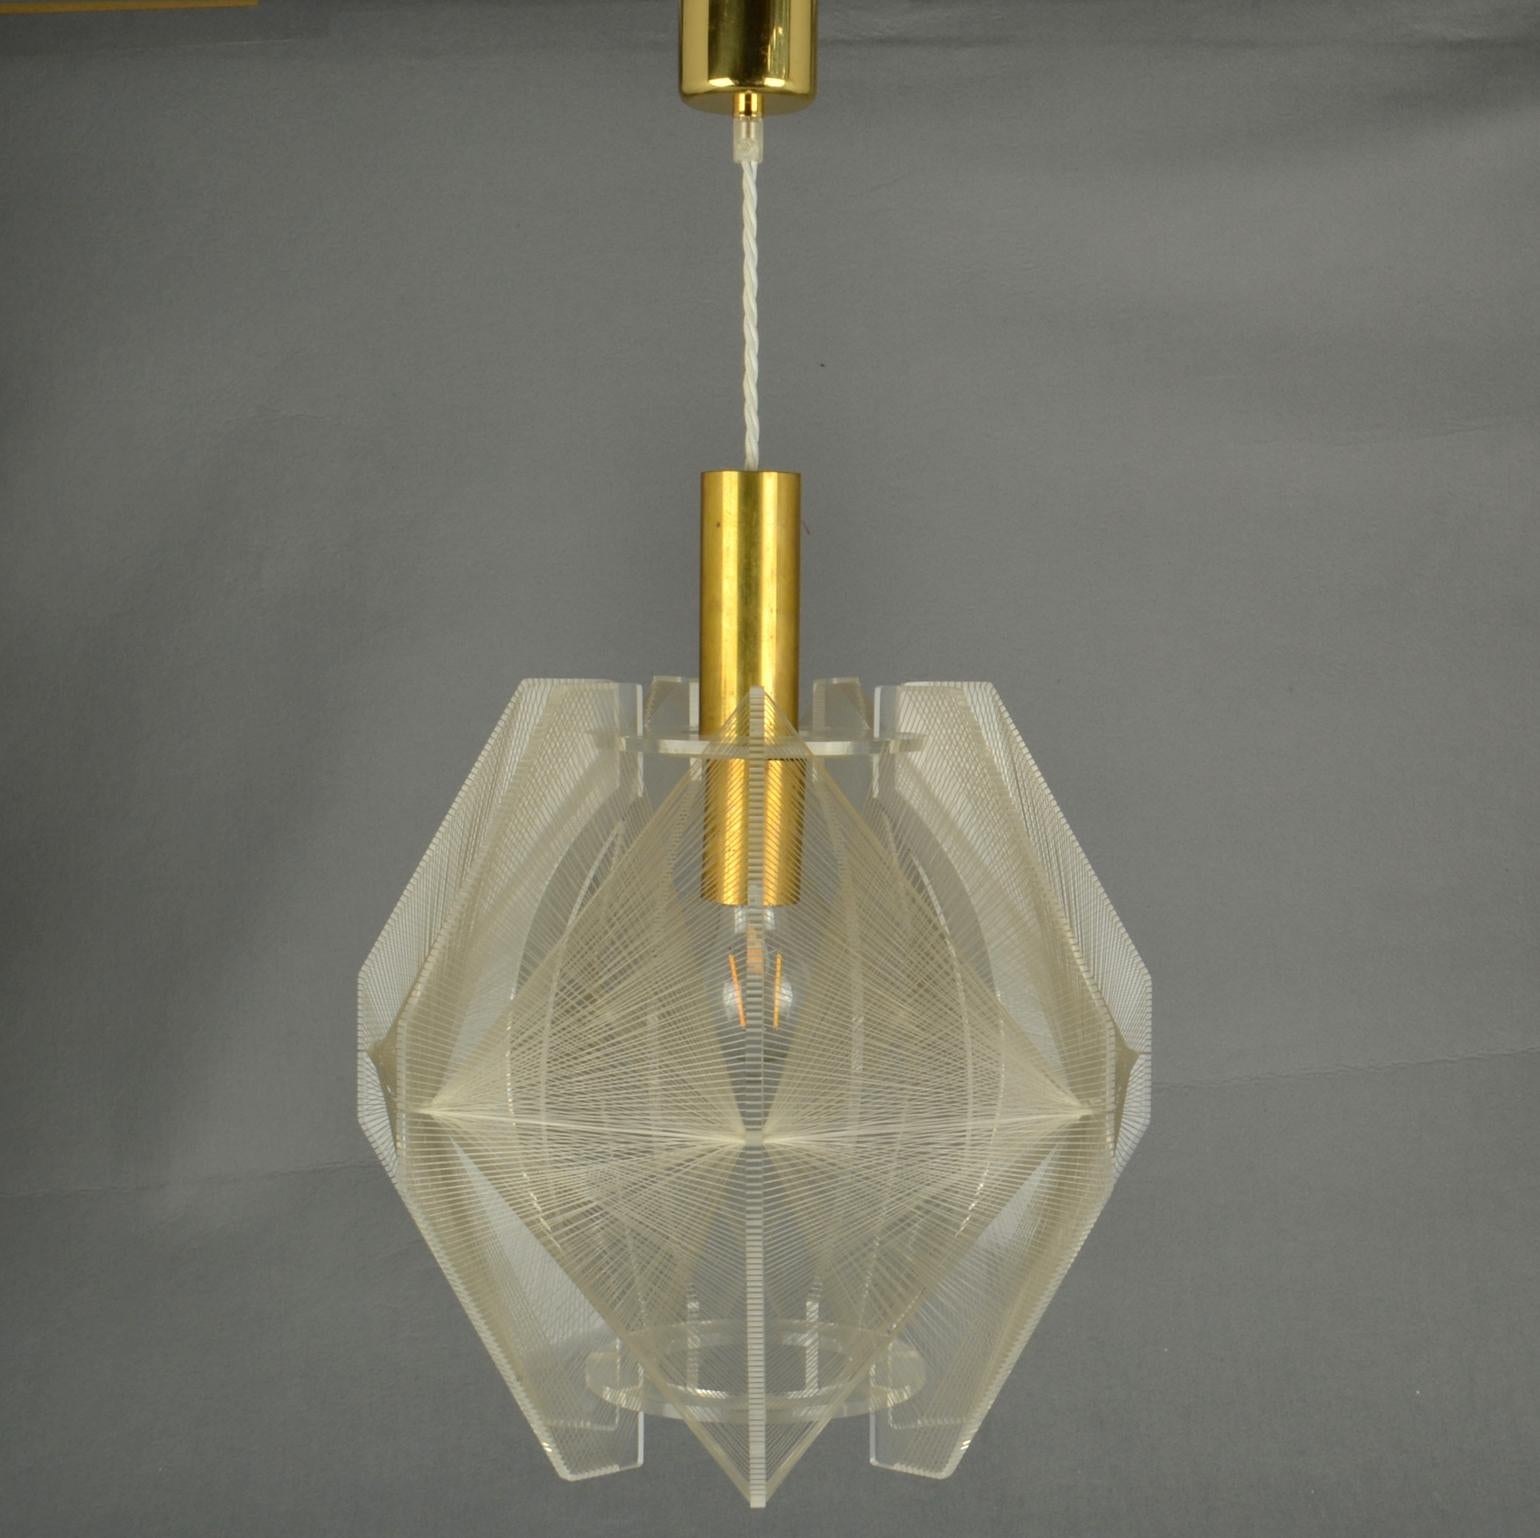 Mid-Century Modern Pendant Lamp in Lucite, Wire and Brass, 1970's For Sale